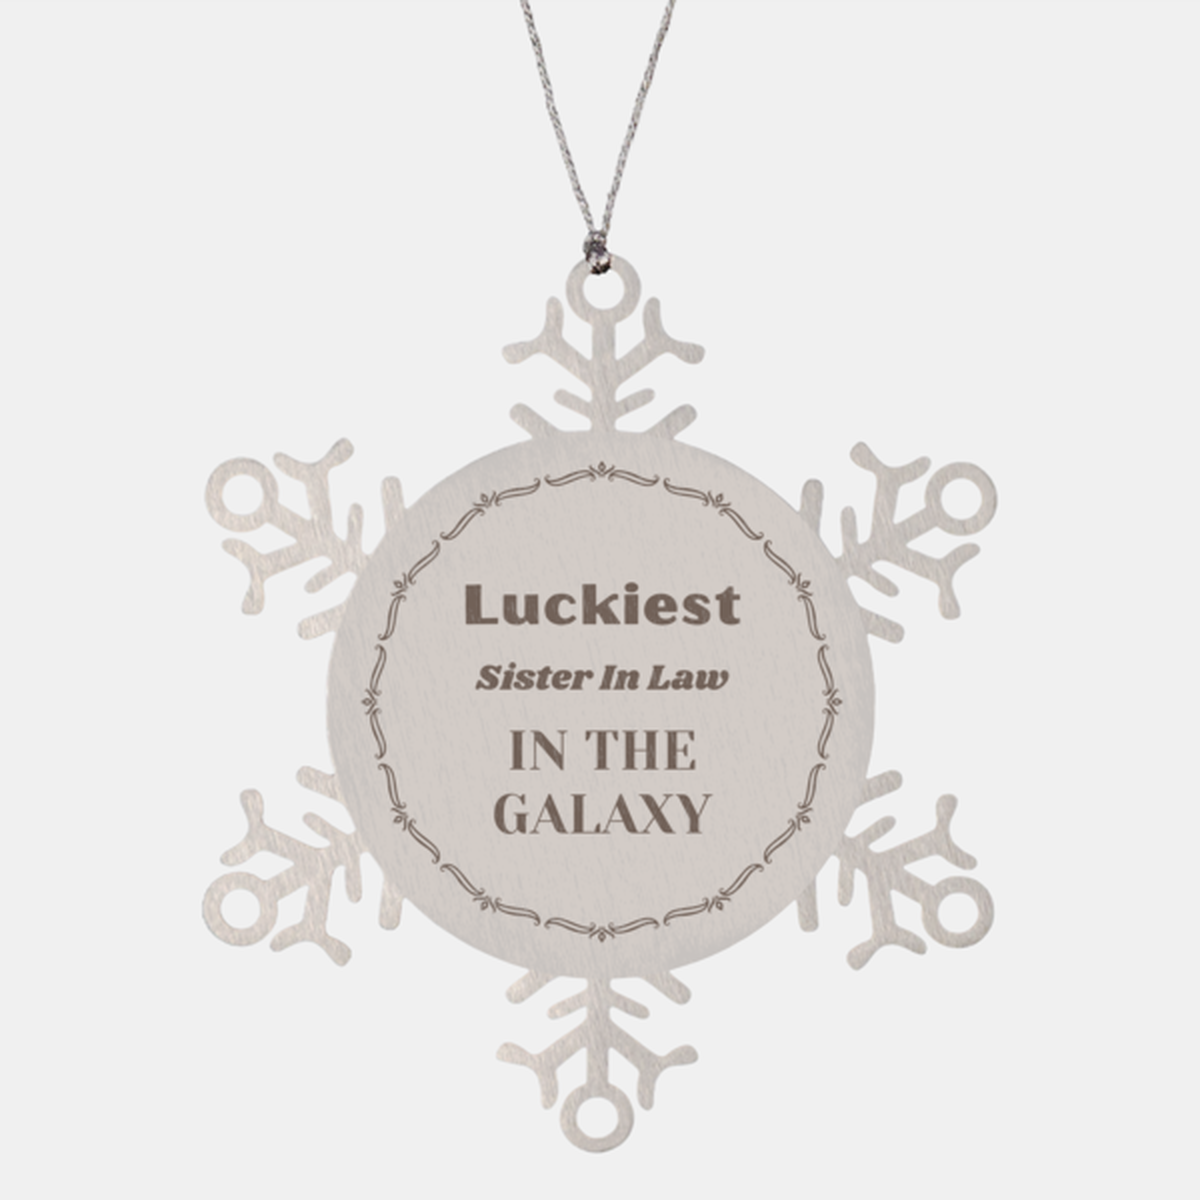 Luckiest Sister In Law in the Galaxy, To My Sister In Law Ornament Gifts, Christmas Sister In Law Snowflake Ornament Gifts, X-mas Decorations Unique Gifts For Sister In Law Men Women